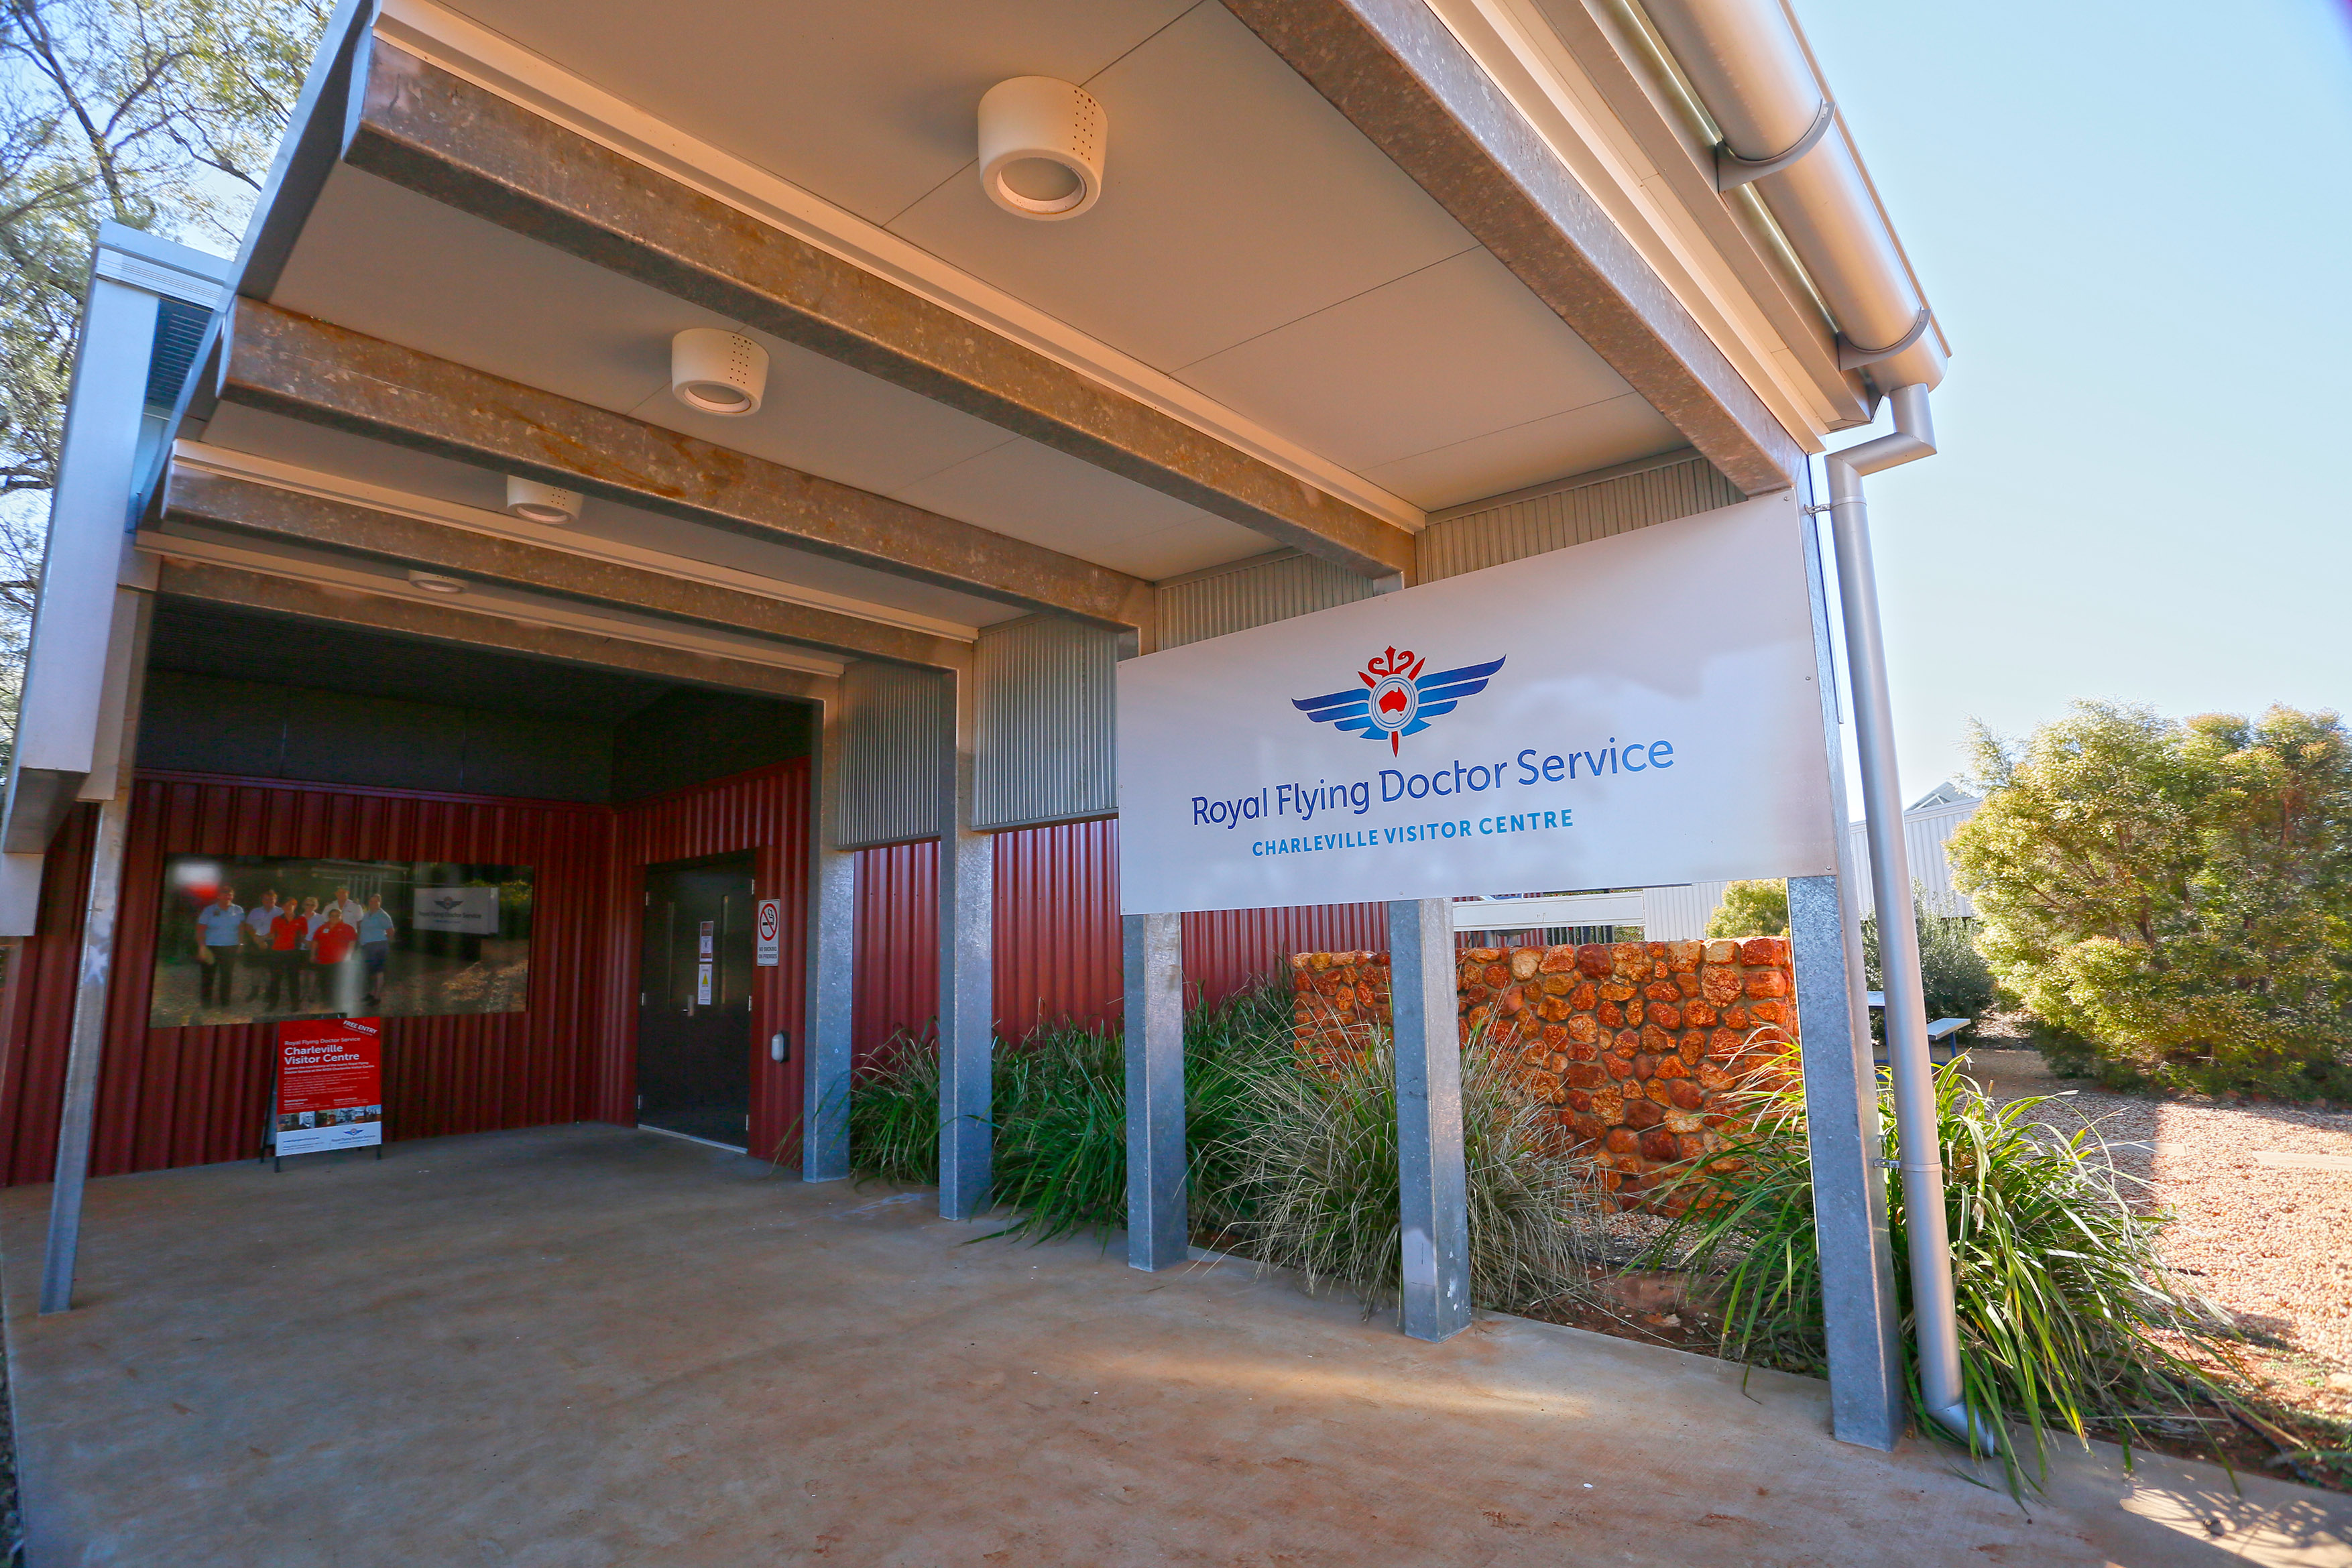 The Royal Flying Doctor Service visitor centre at Charleville airport